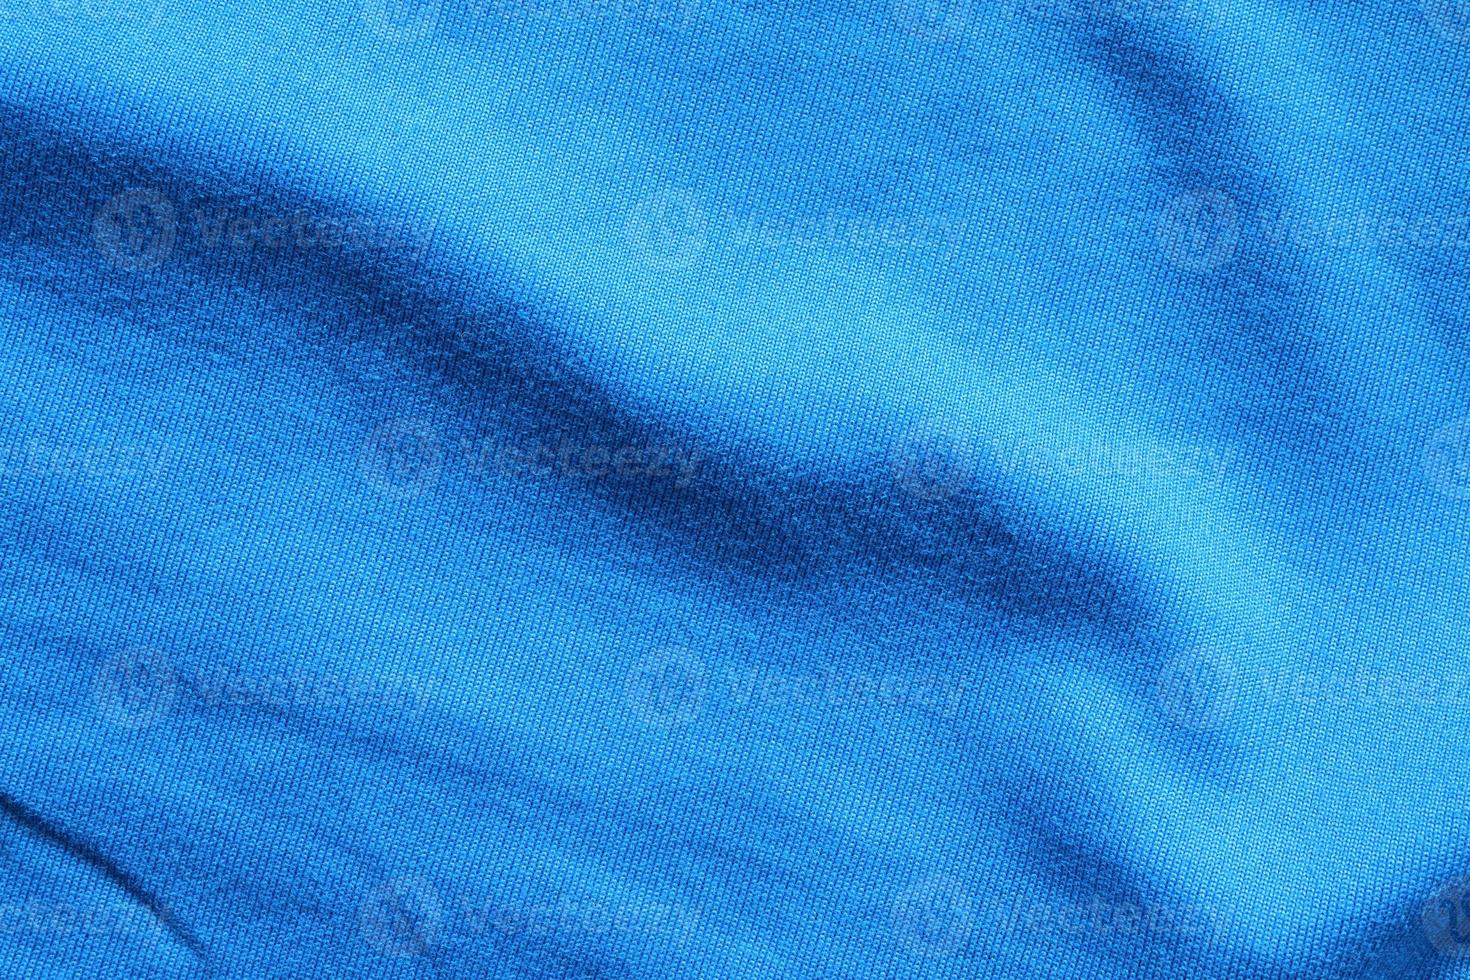 Blue football jersey clothing fabric texture sports wear background photo